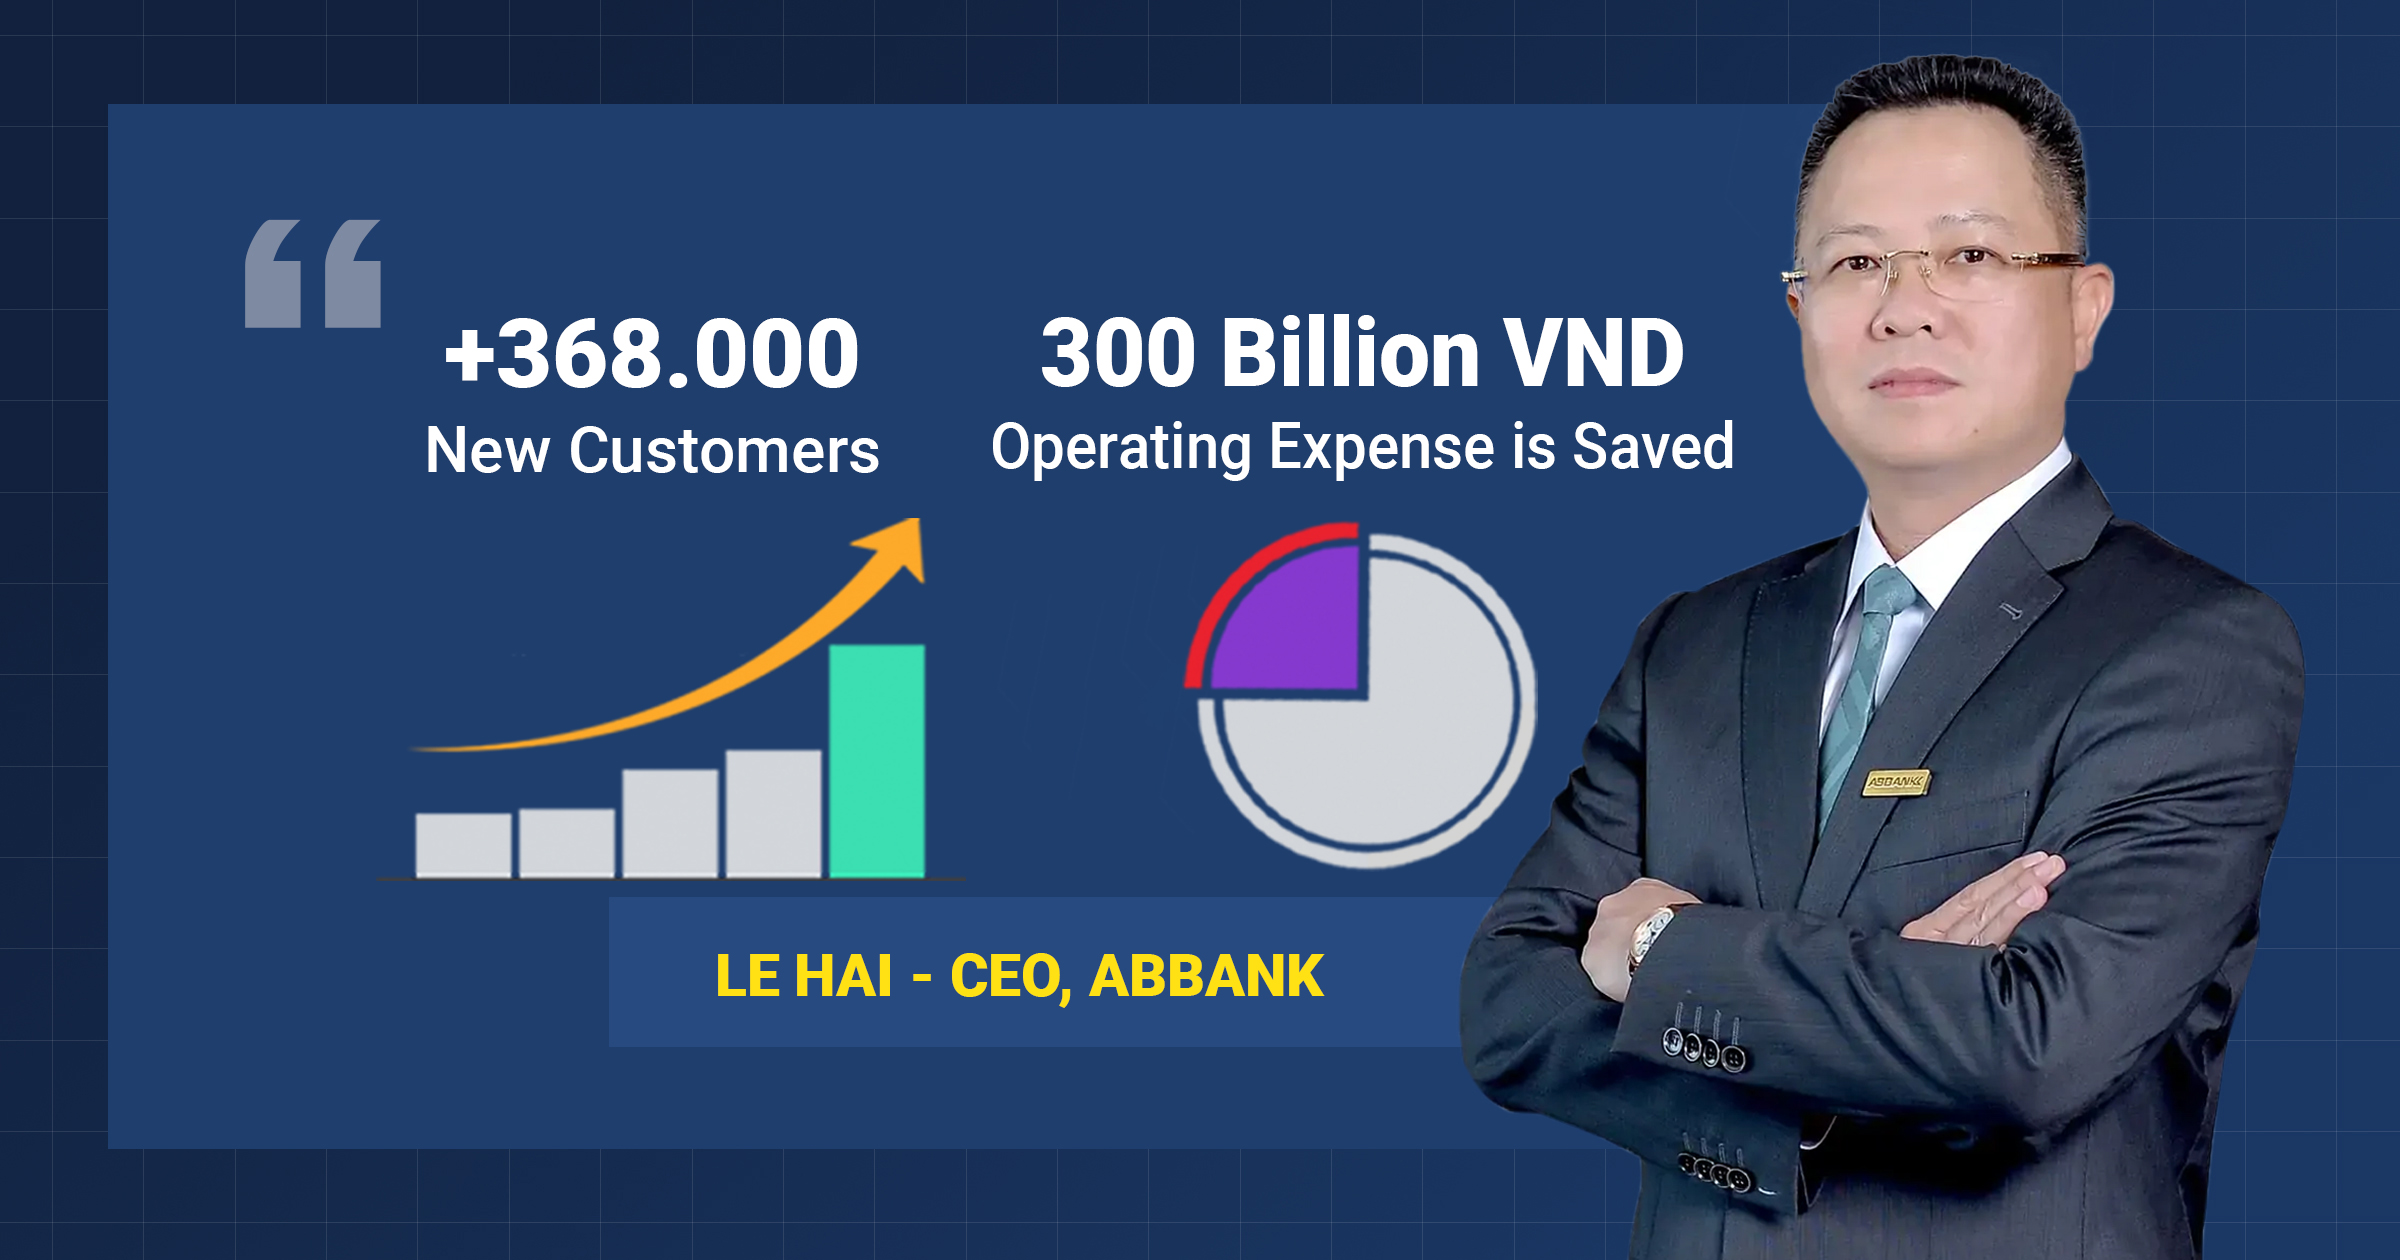 Le Hai, CEO of ABBank, highly appreciates the application of Smart Form